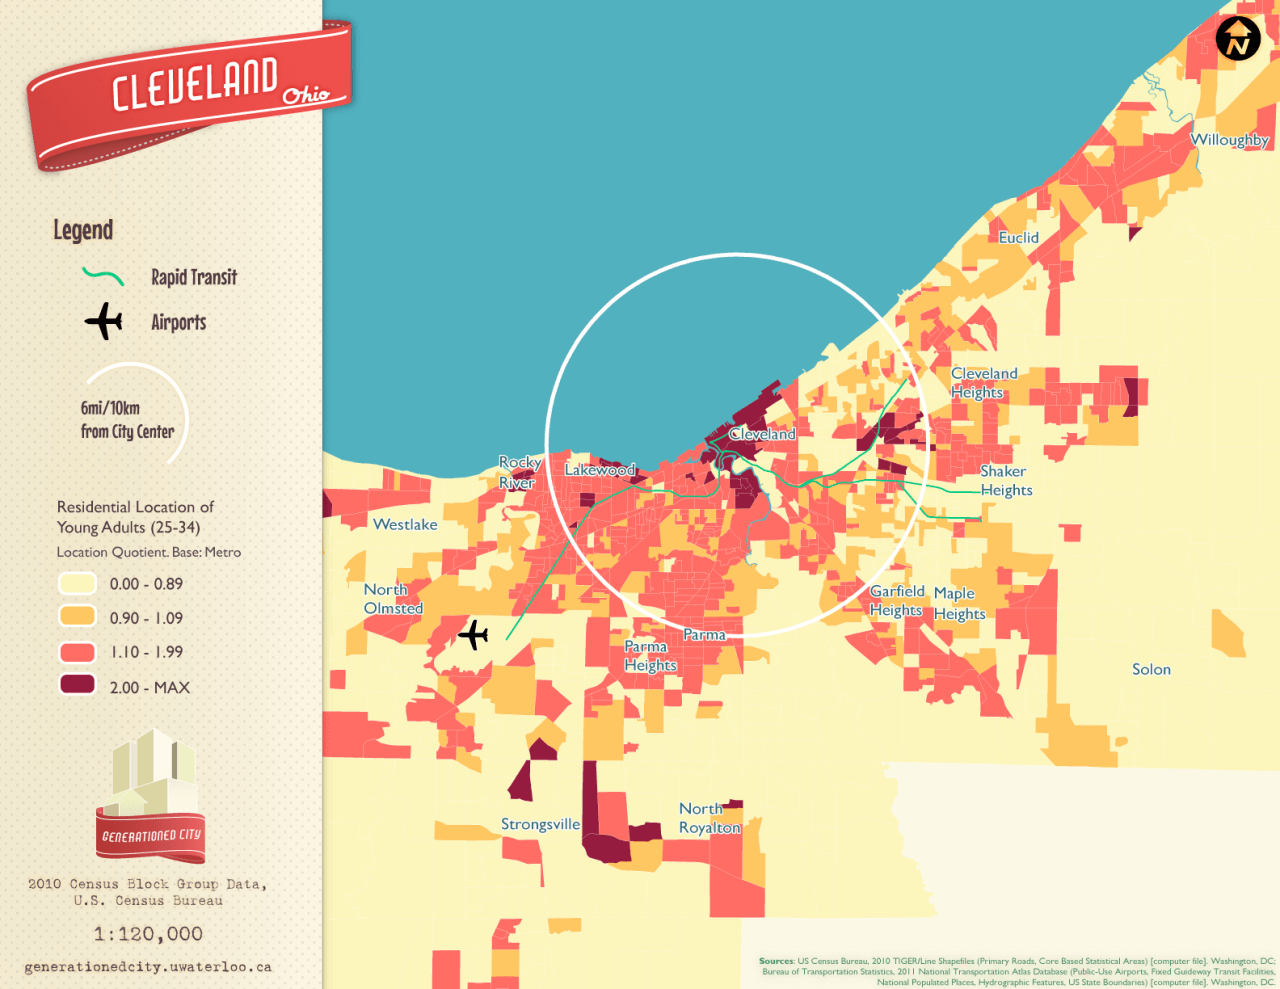 Residential location of young adults in Cleveland.